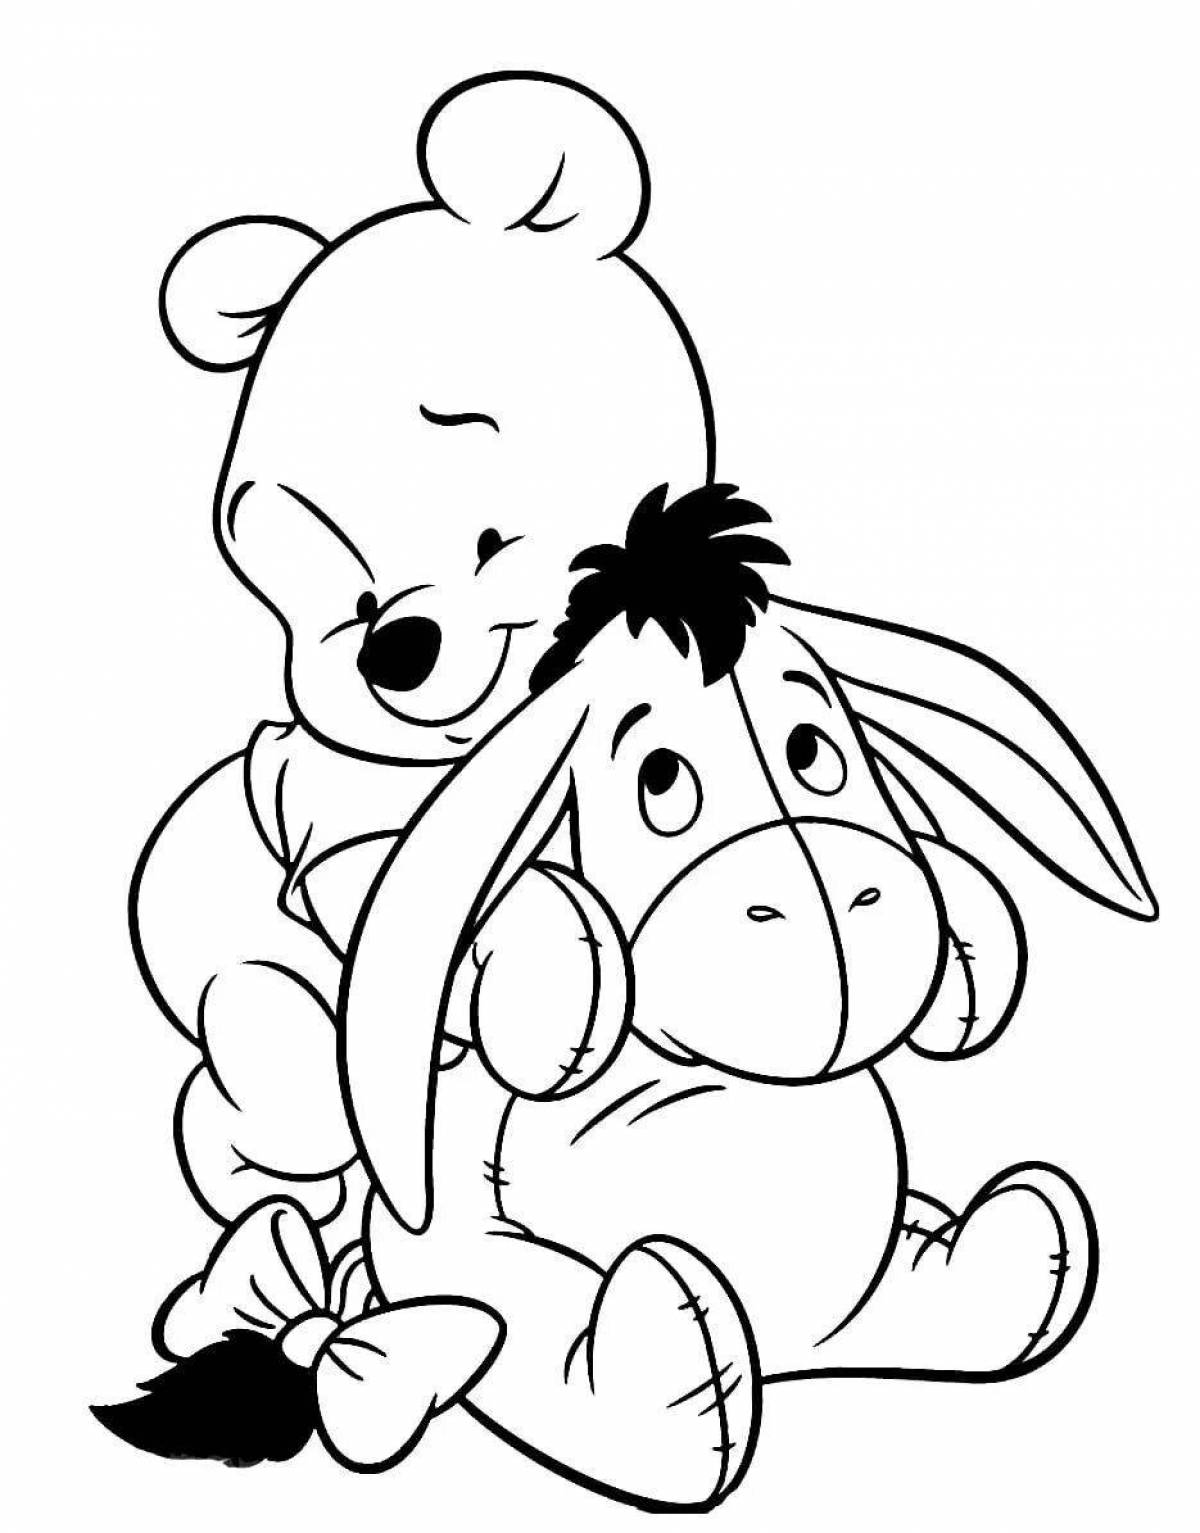 Outstanding winnie the pooh coloring book for kids